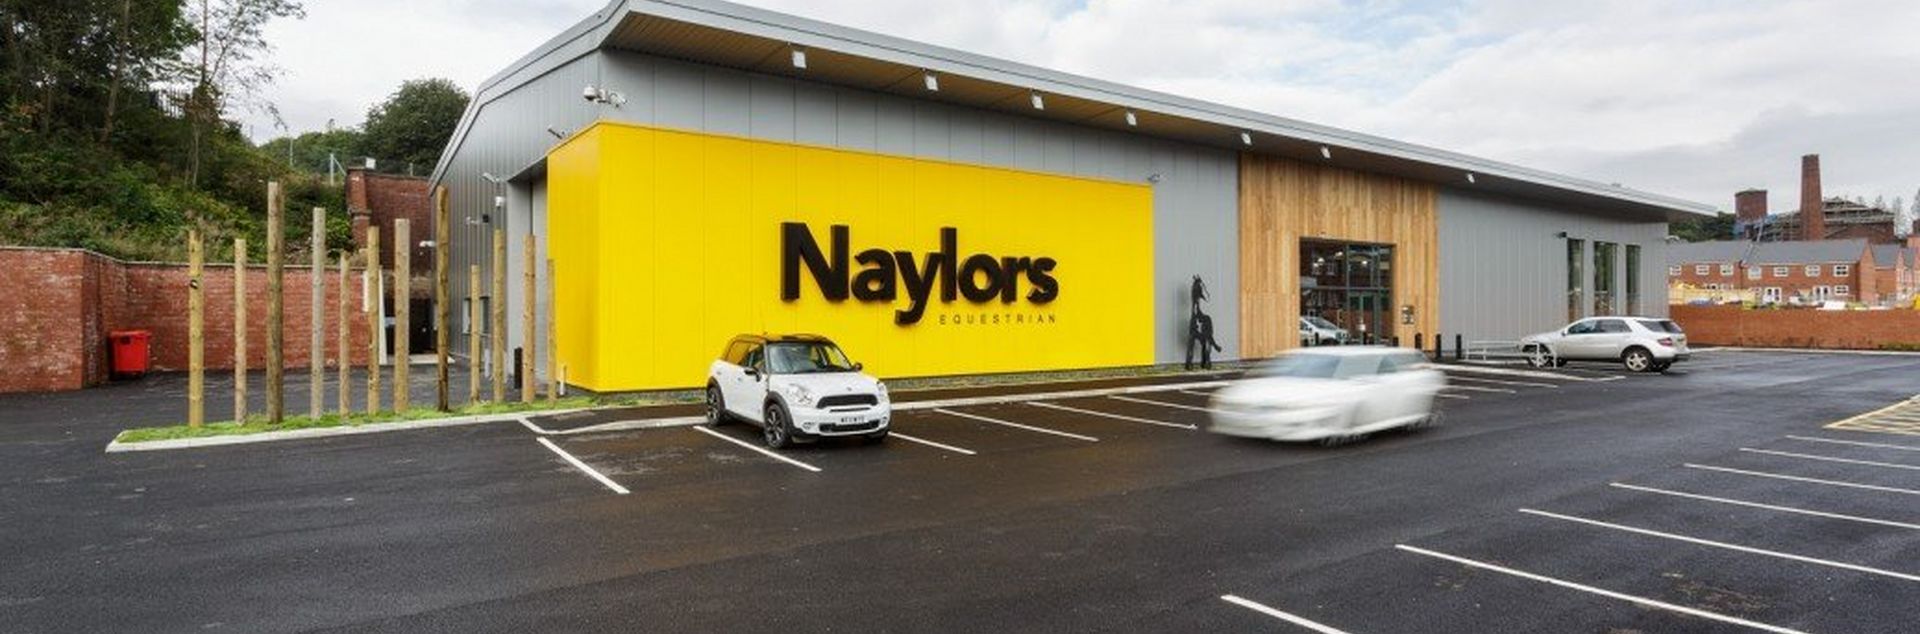 Naylors new equestrian superstore – Take a look inside!